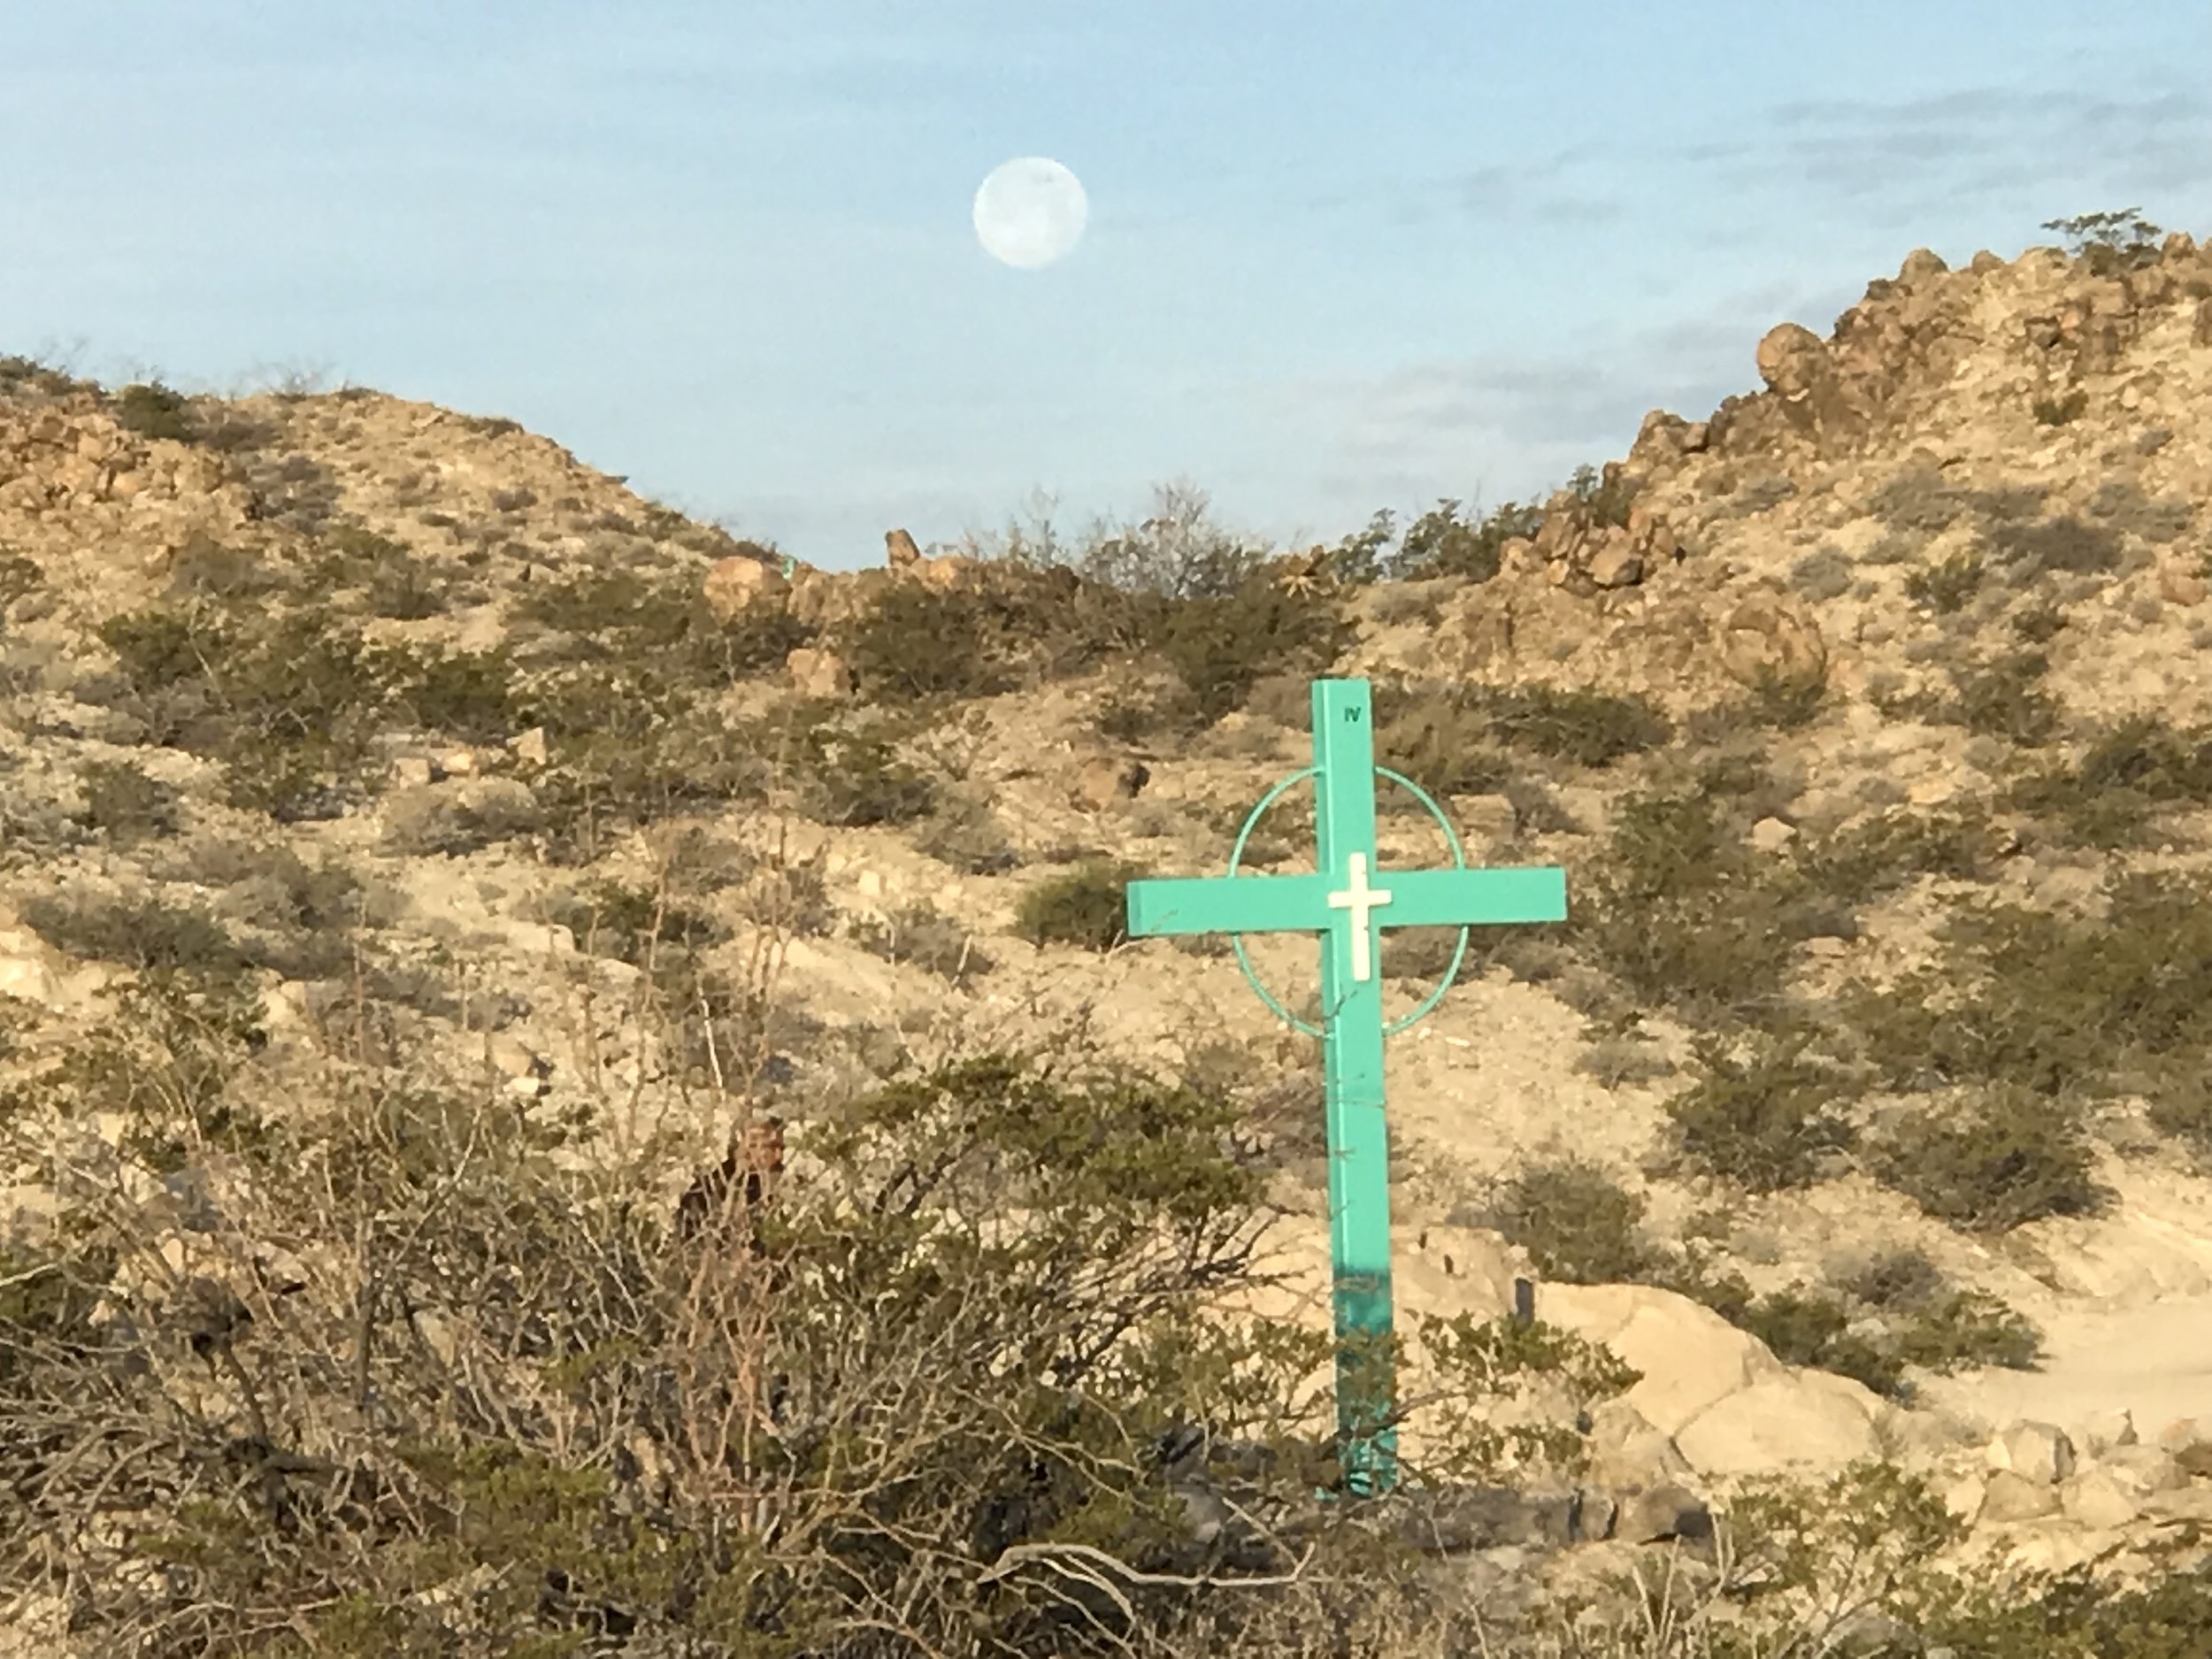  A full moon sets behind a cross marking the path up Christo Rey Mountain just outside El Paso.      